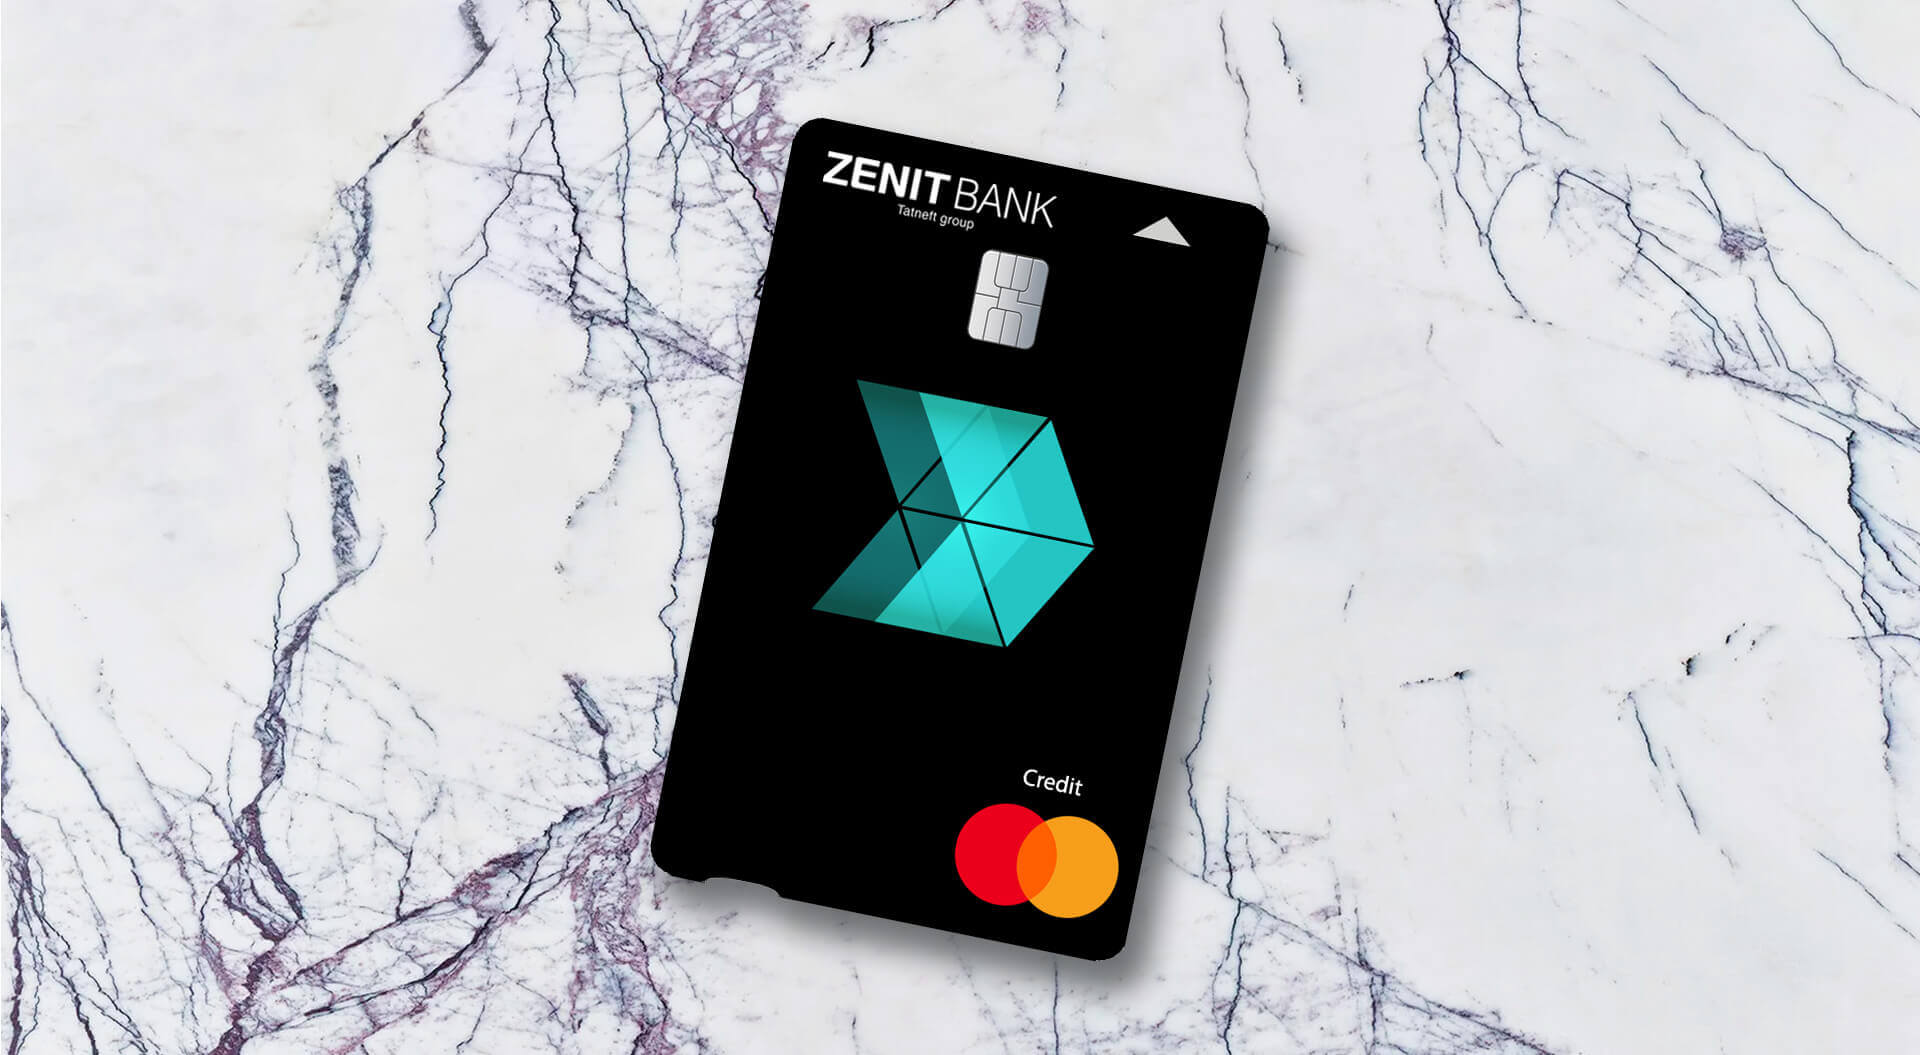 Zenit Bank Russia, Credit Card Graphic Branding, Retail Brand Identity - CampbellRigg Agency